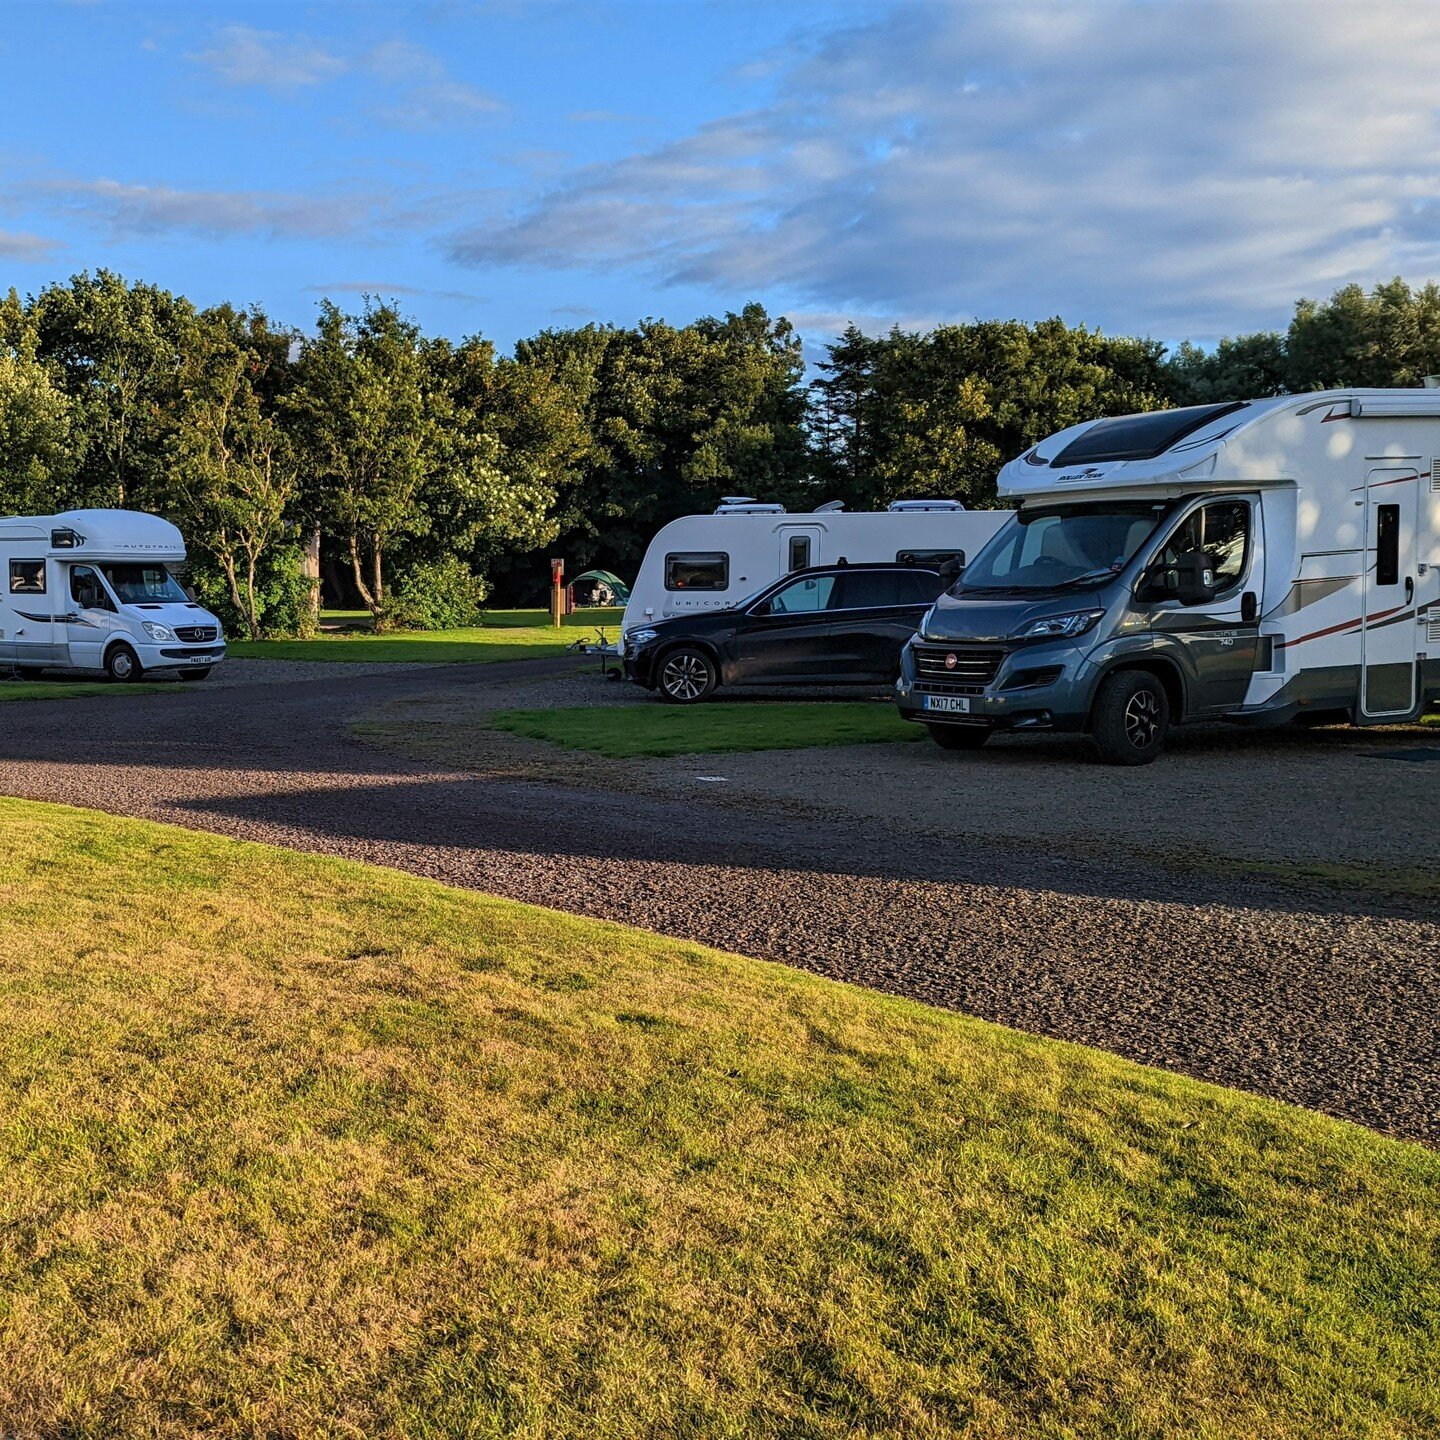 A lovely sunny day on the campsite.

#caithness #nc500 #nc500accommodationsightsandtips #northcoast500 #camping #campsite #scottishhighlands